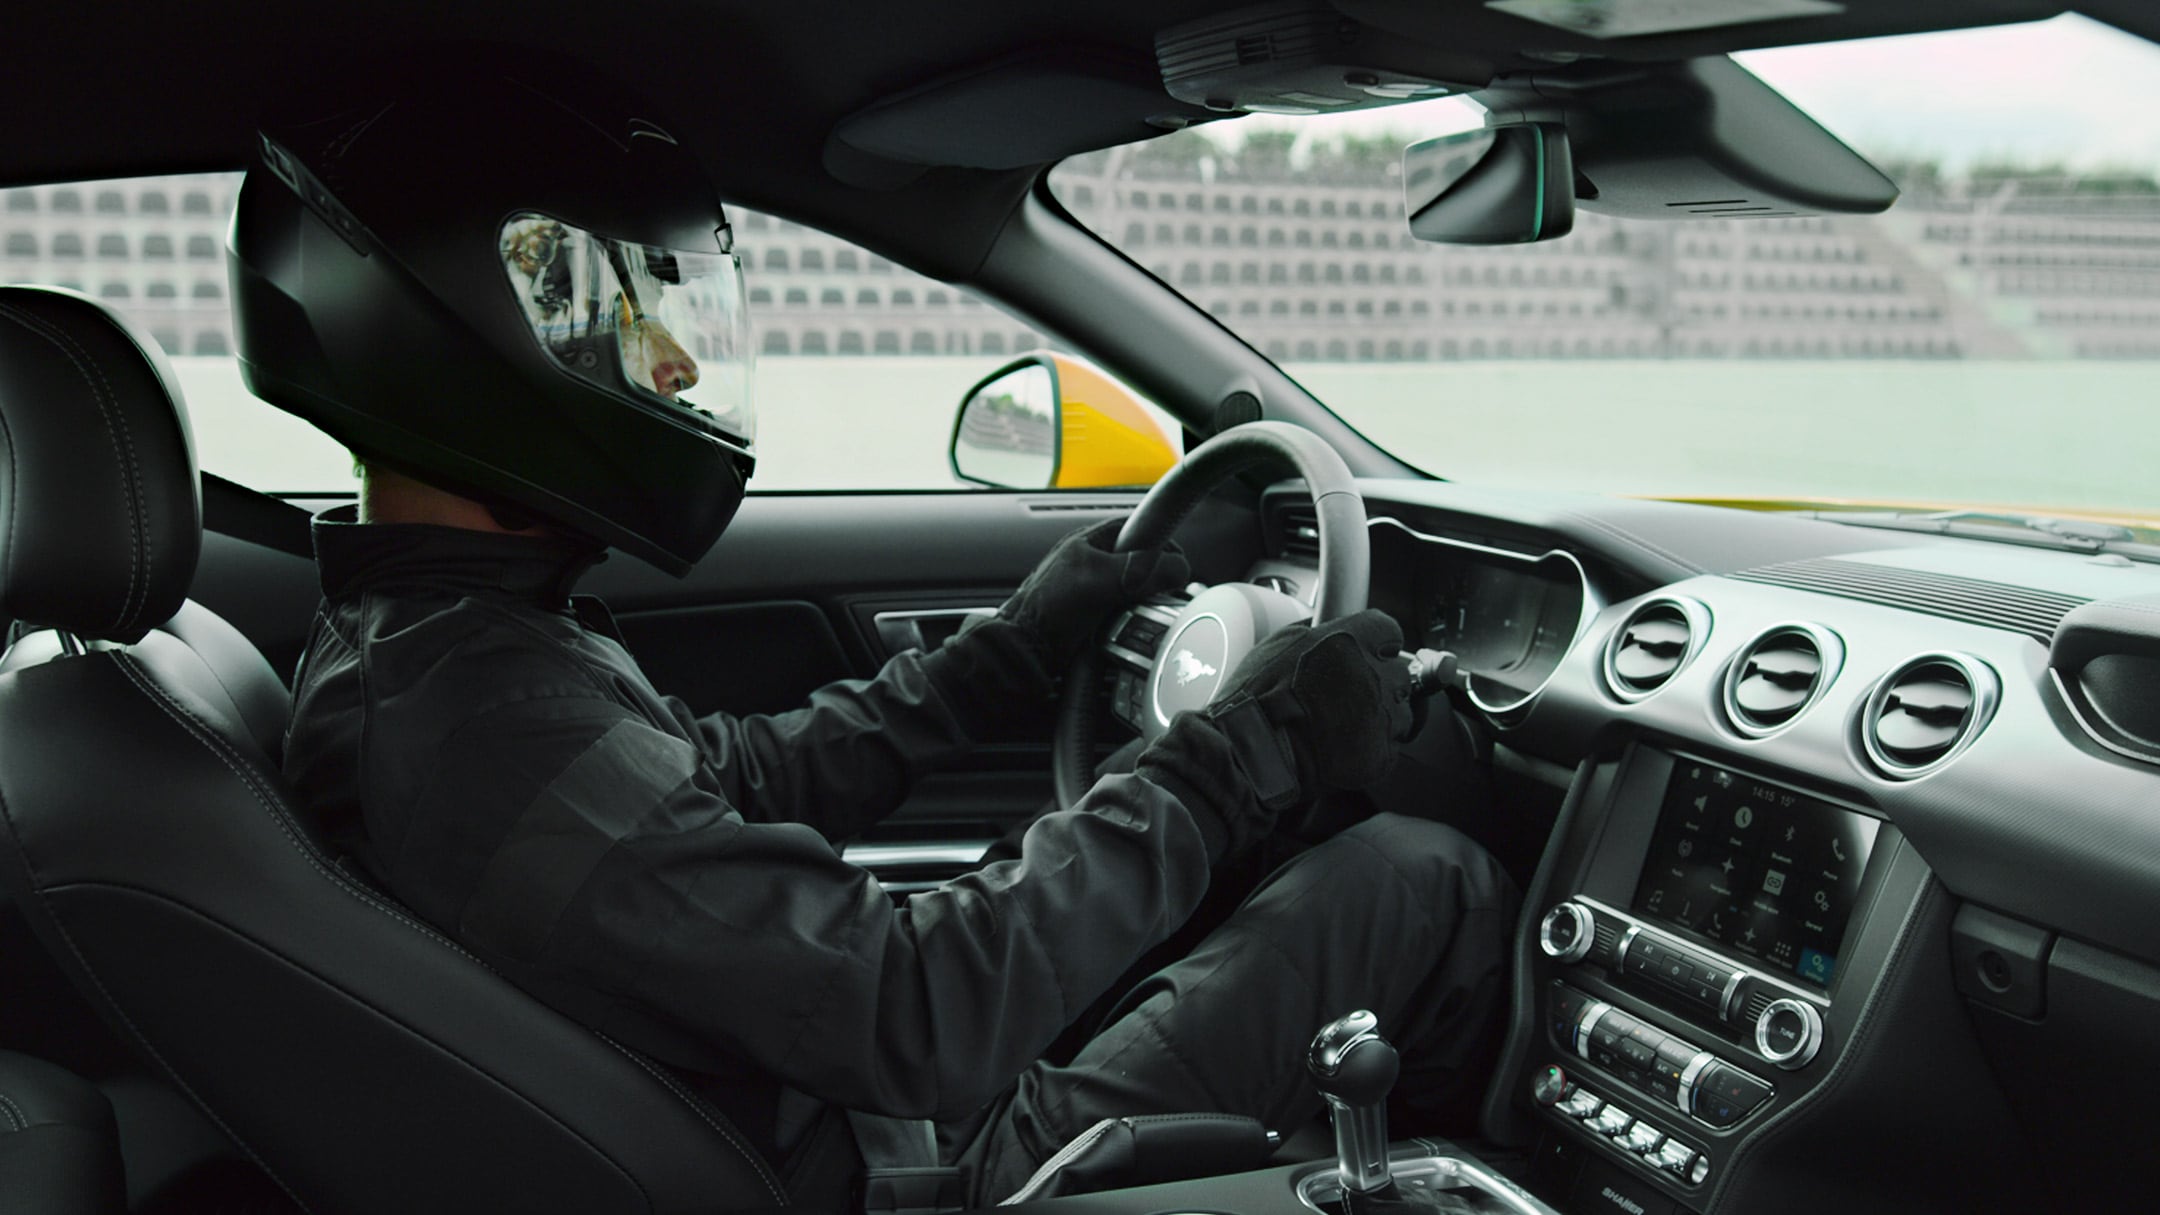 Ford Mustang interior view with racing driver